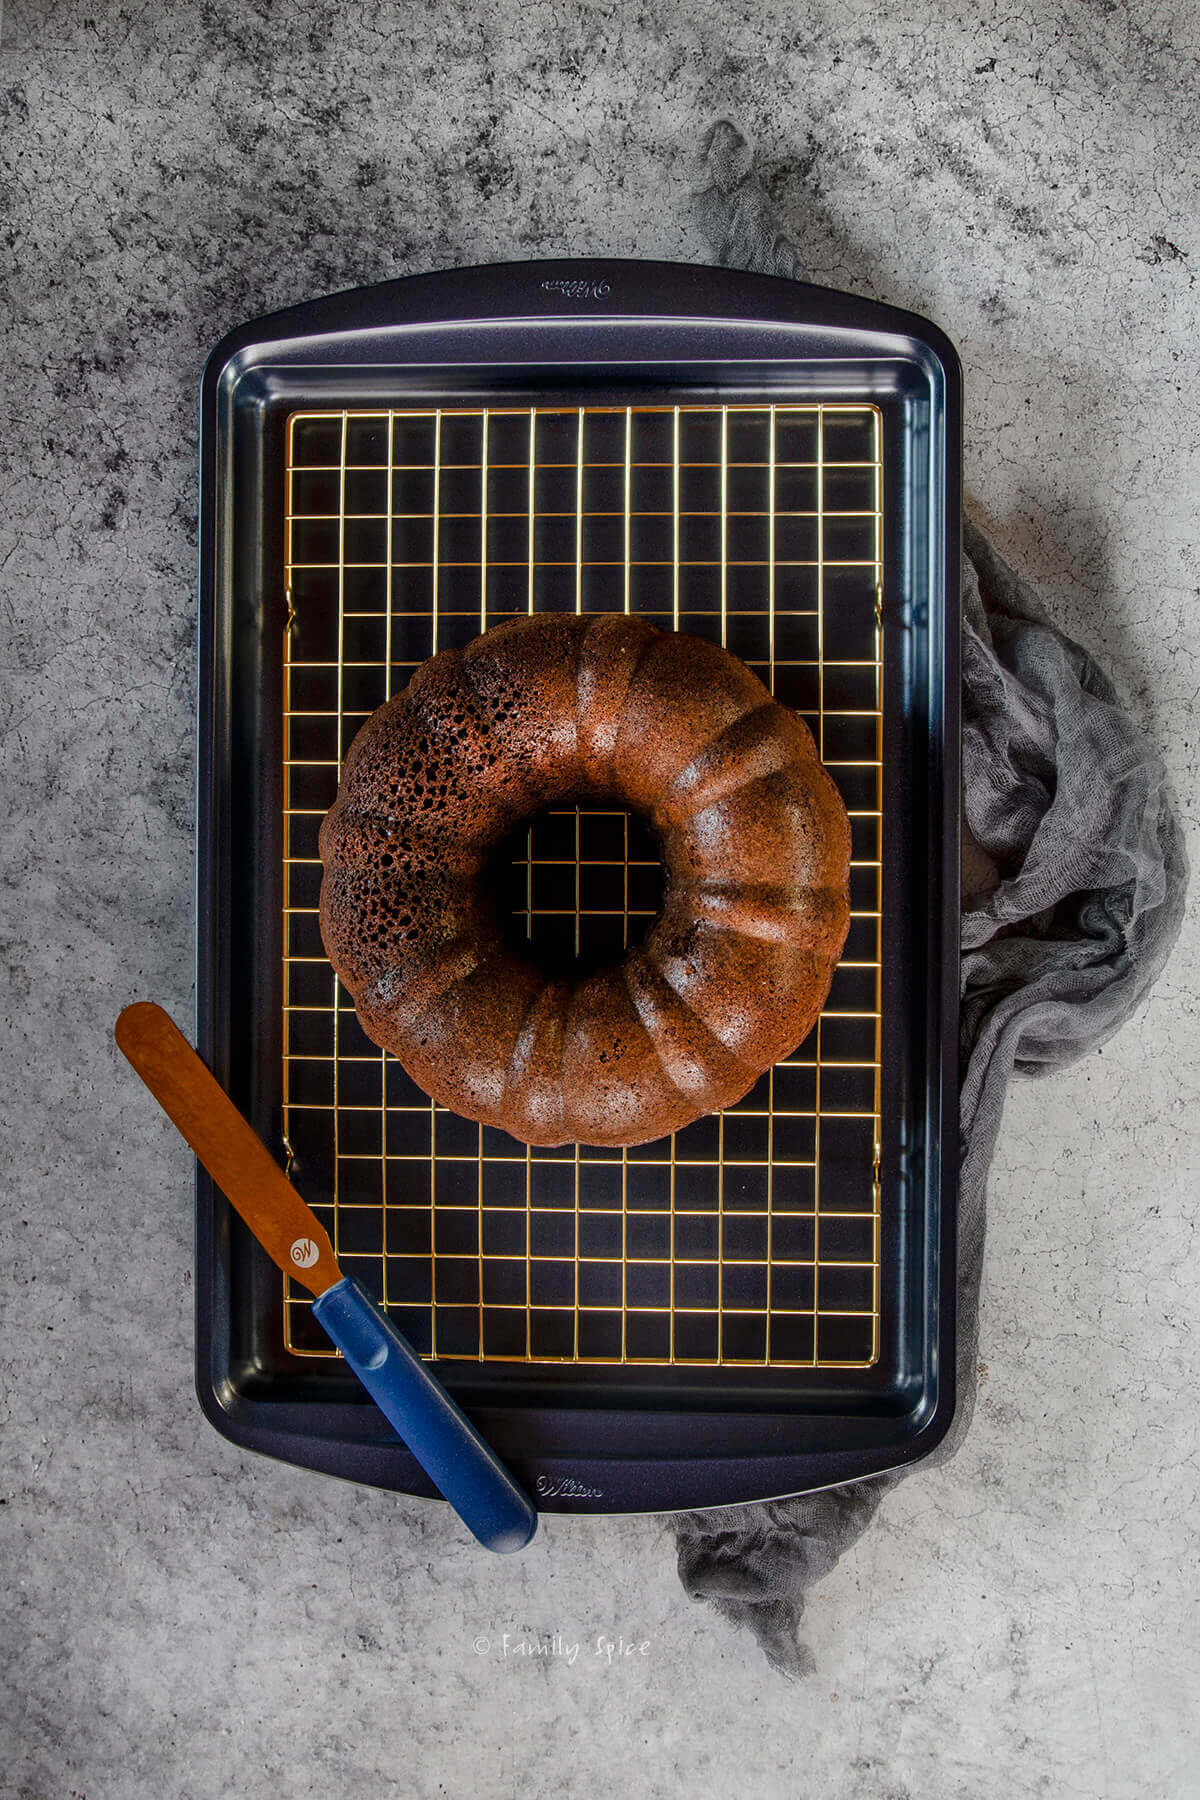 Chocolate guinness bundt cake cooling on a gold cooling rack over a navy blue baking sheet